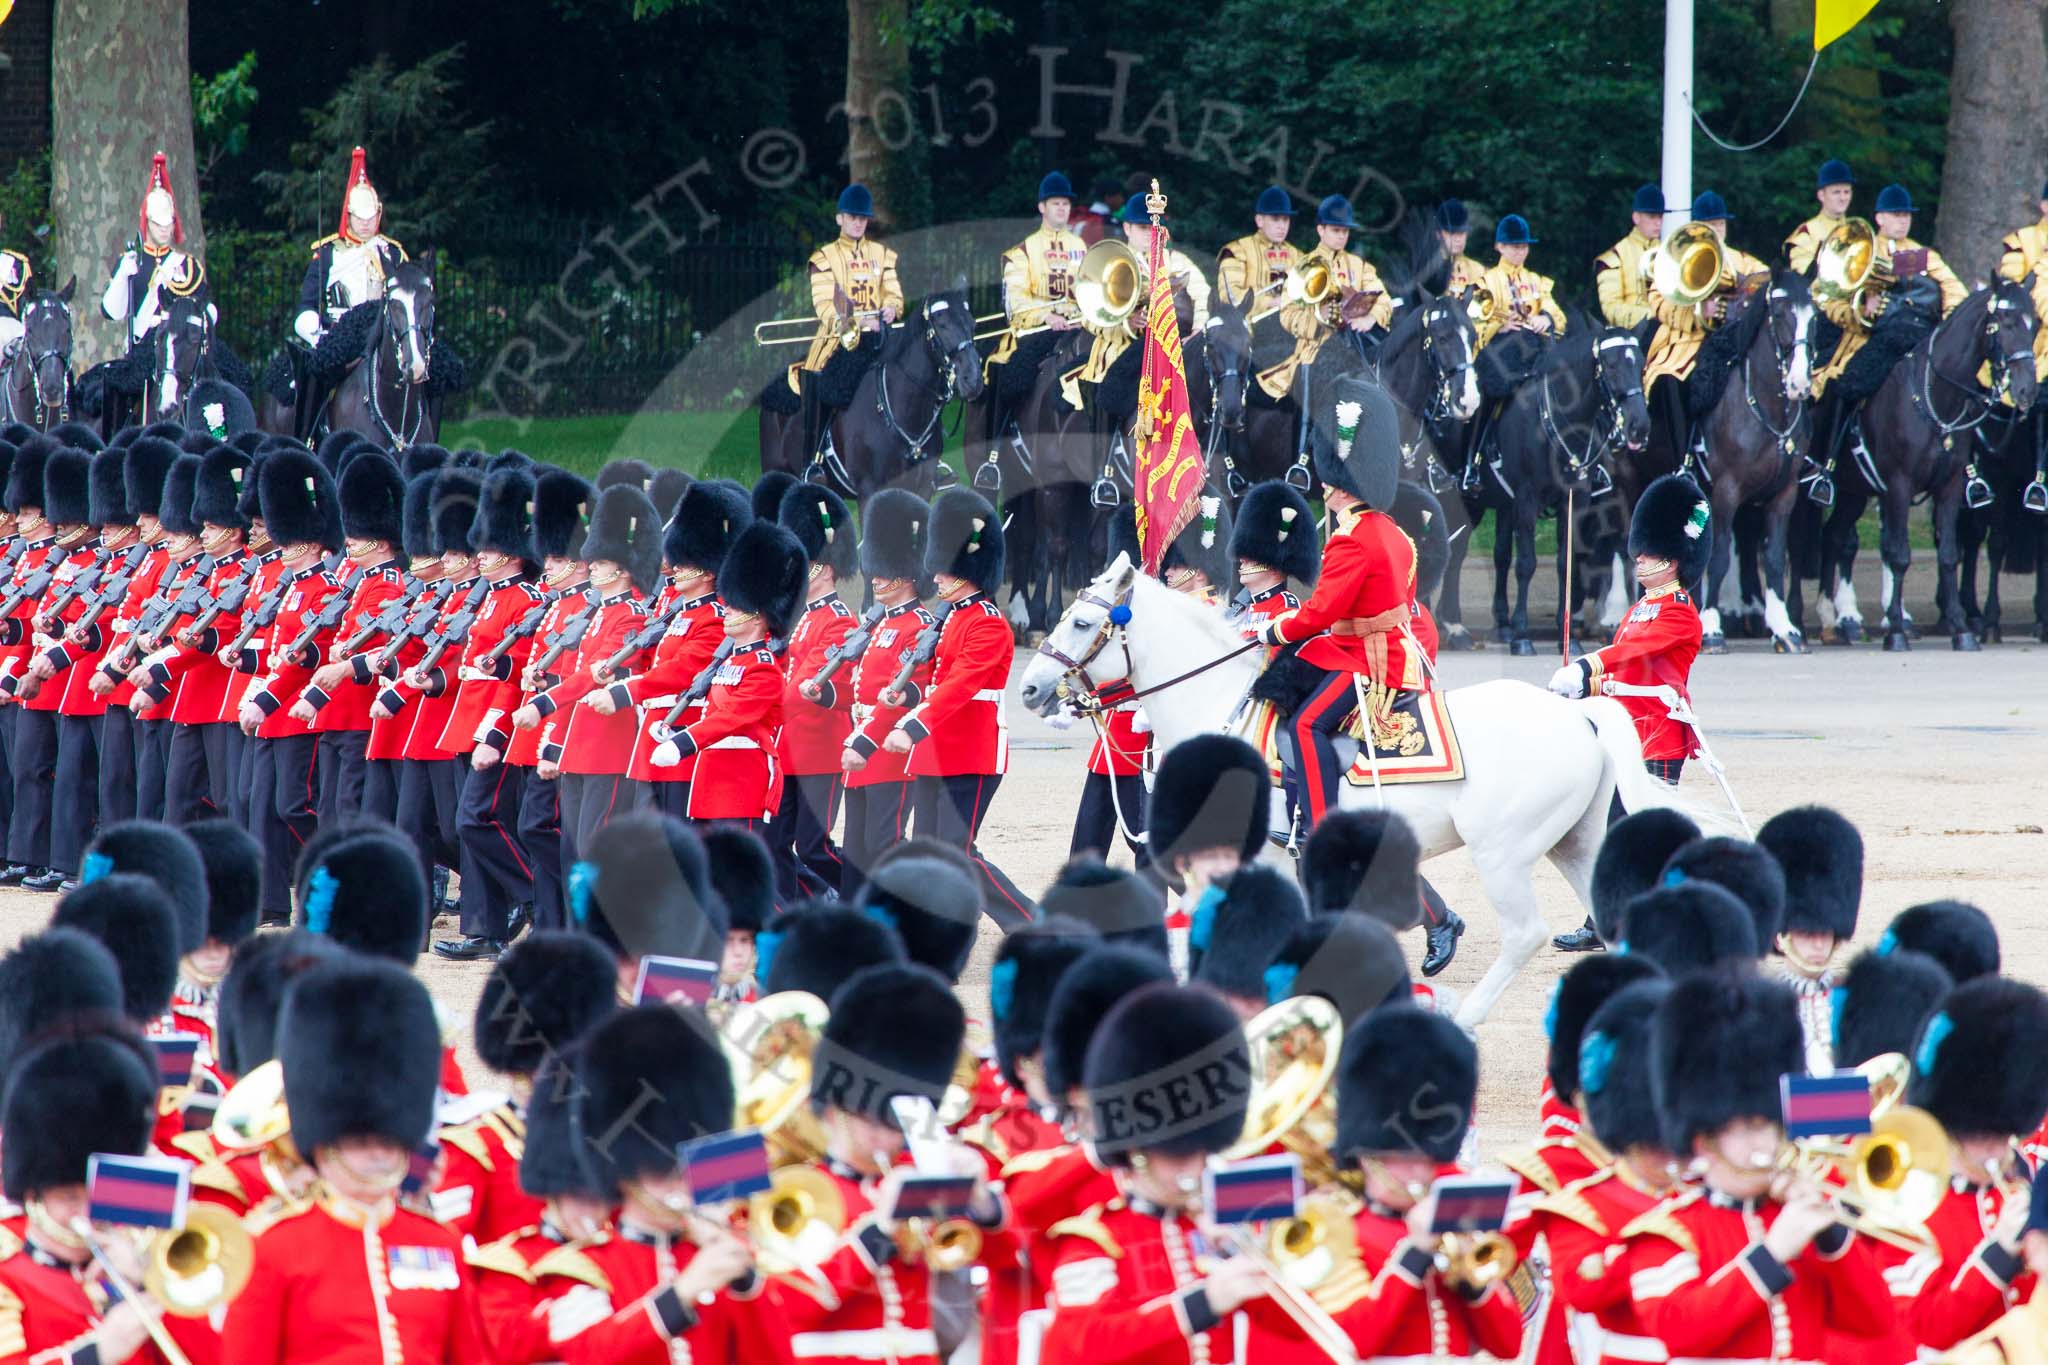 Trooping the Colour 2013: No. 1 Guard (Escort for the Colour),1st Battalion Welsh Guards, at the beginning of the March Past in Quick Time. Behind them the Mounted Bands of the Household Cavalry. The Field Officer appears from the right to return to the head of the march past. Image #579, 15 June 2013 11:42 Horse Guards Parade, London, UK